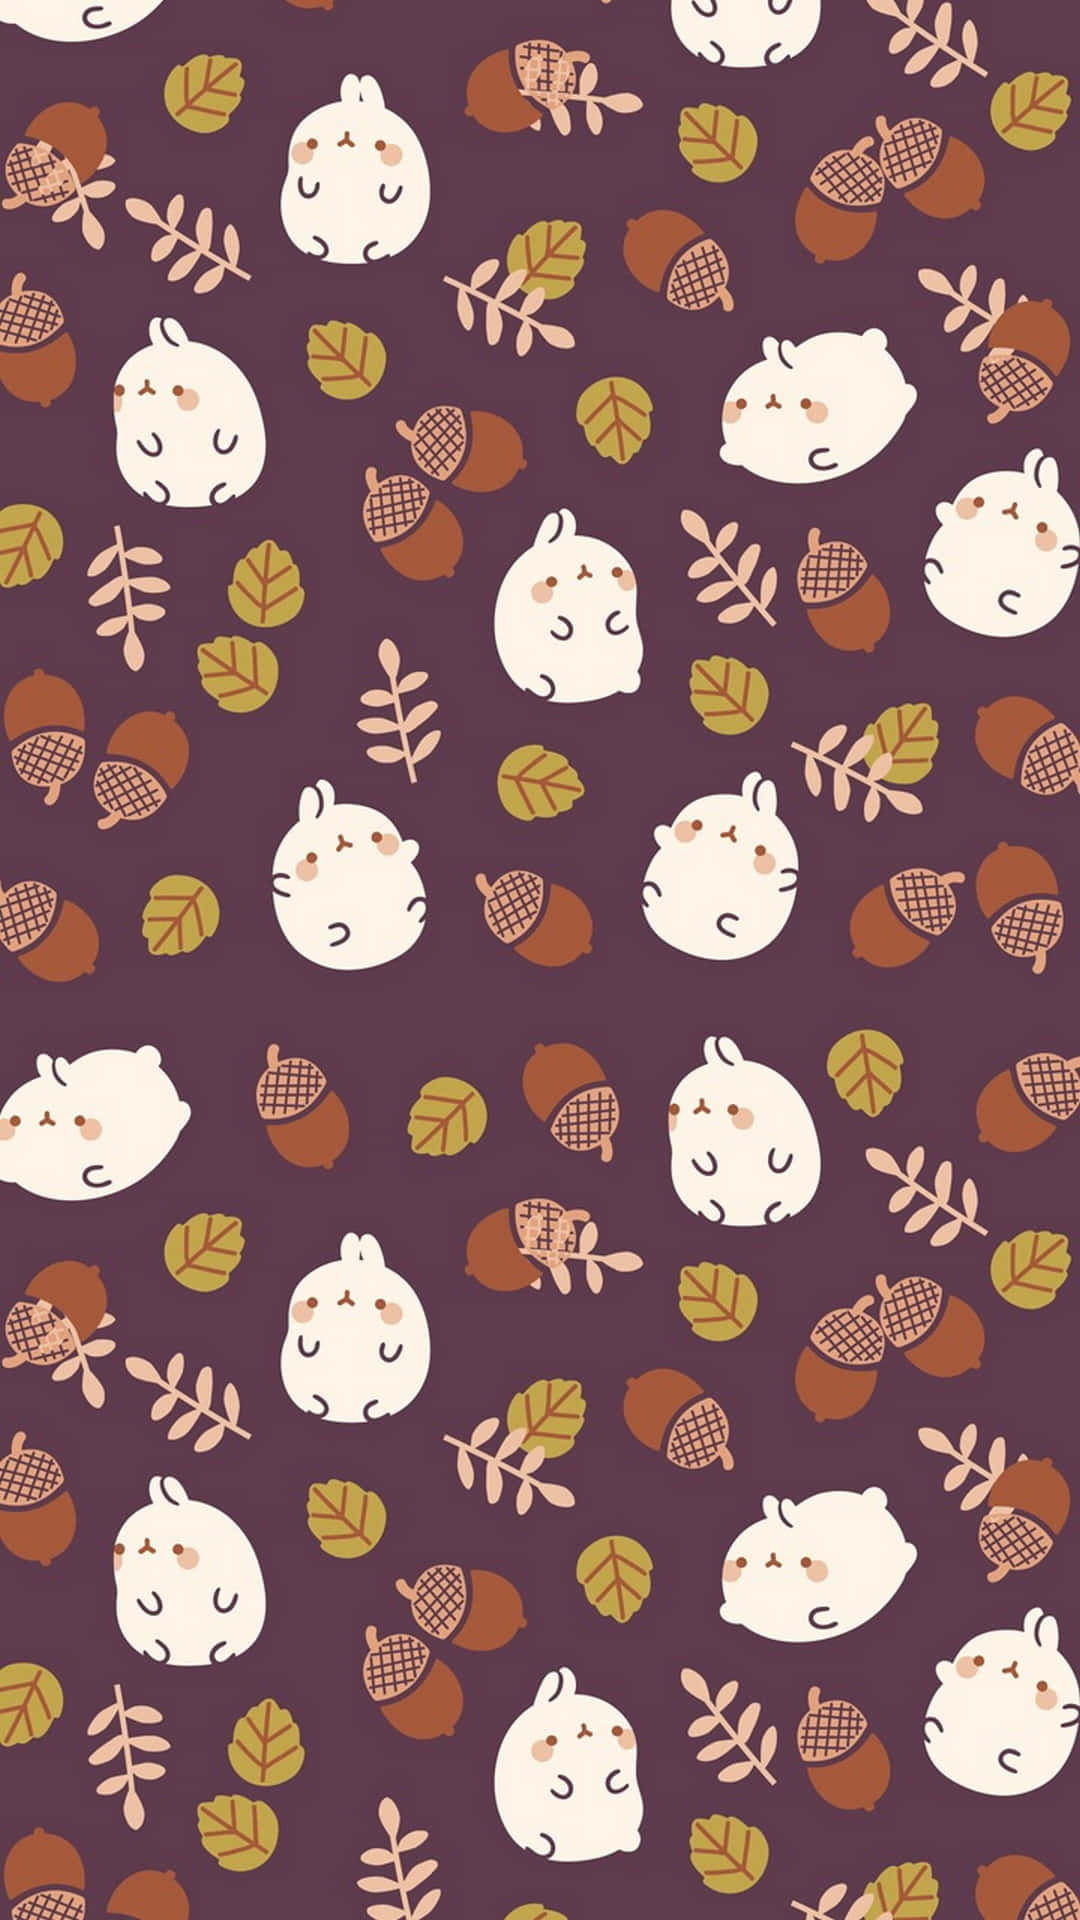 A Pattern With Cute Animals And Leaves Wallpaper